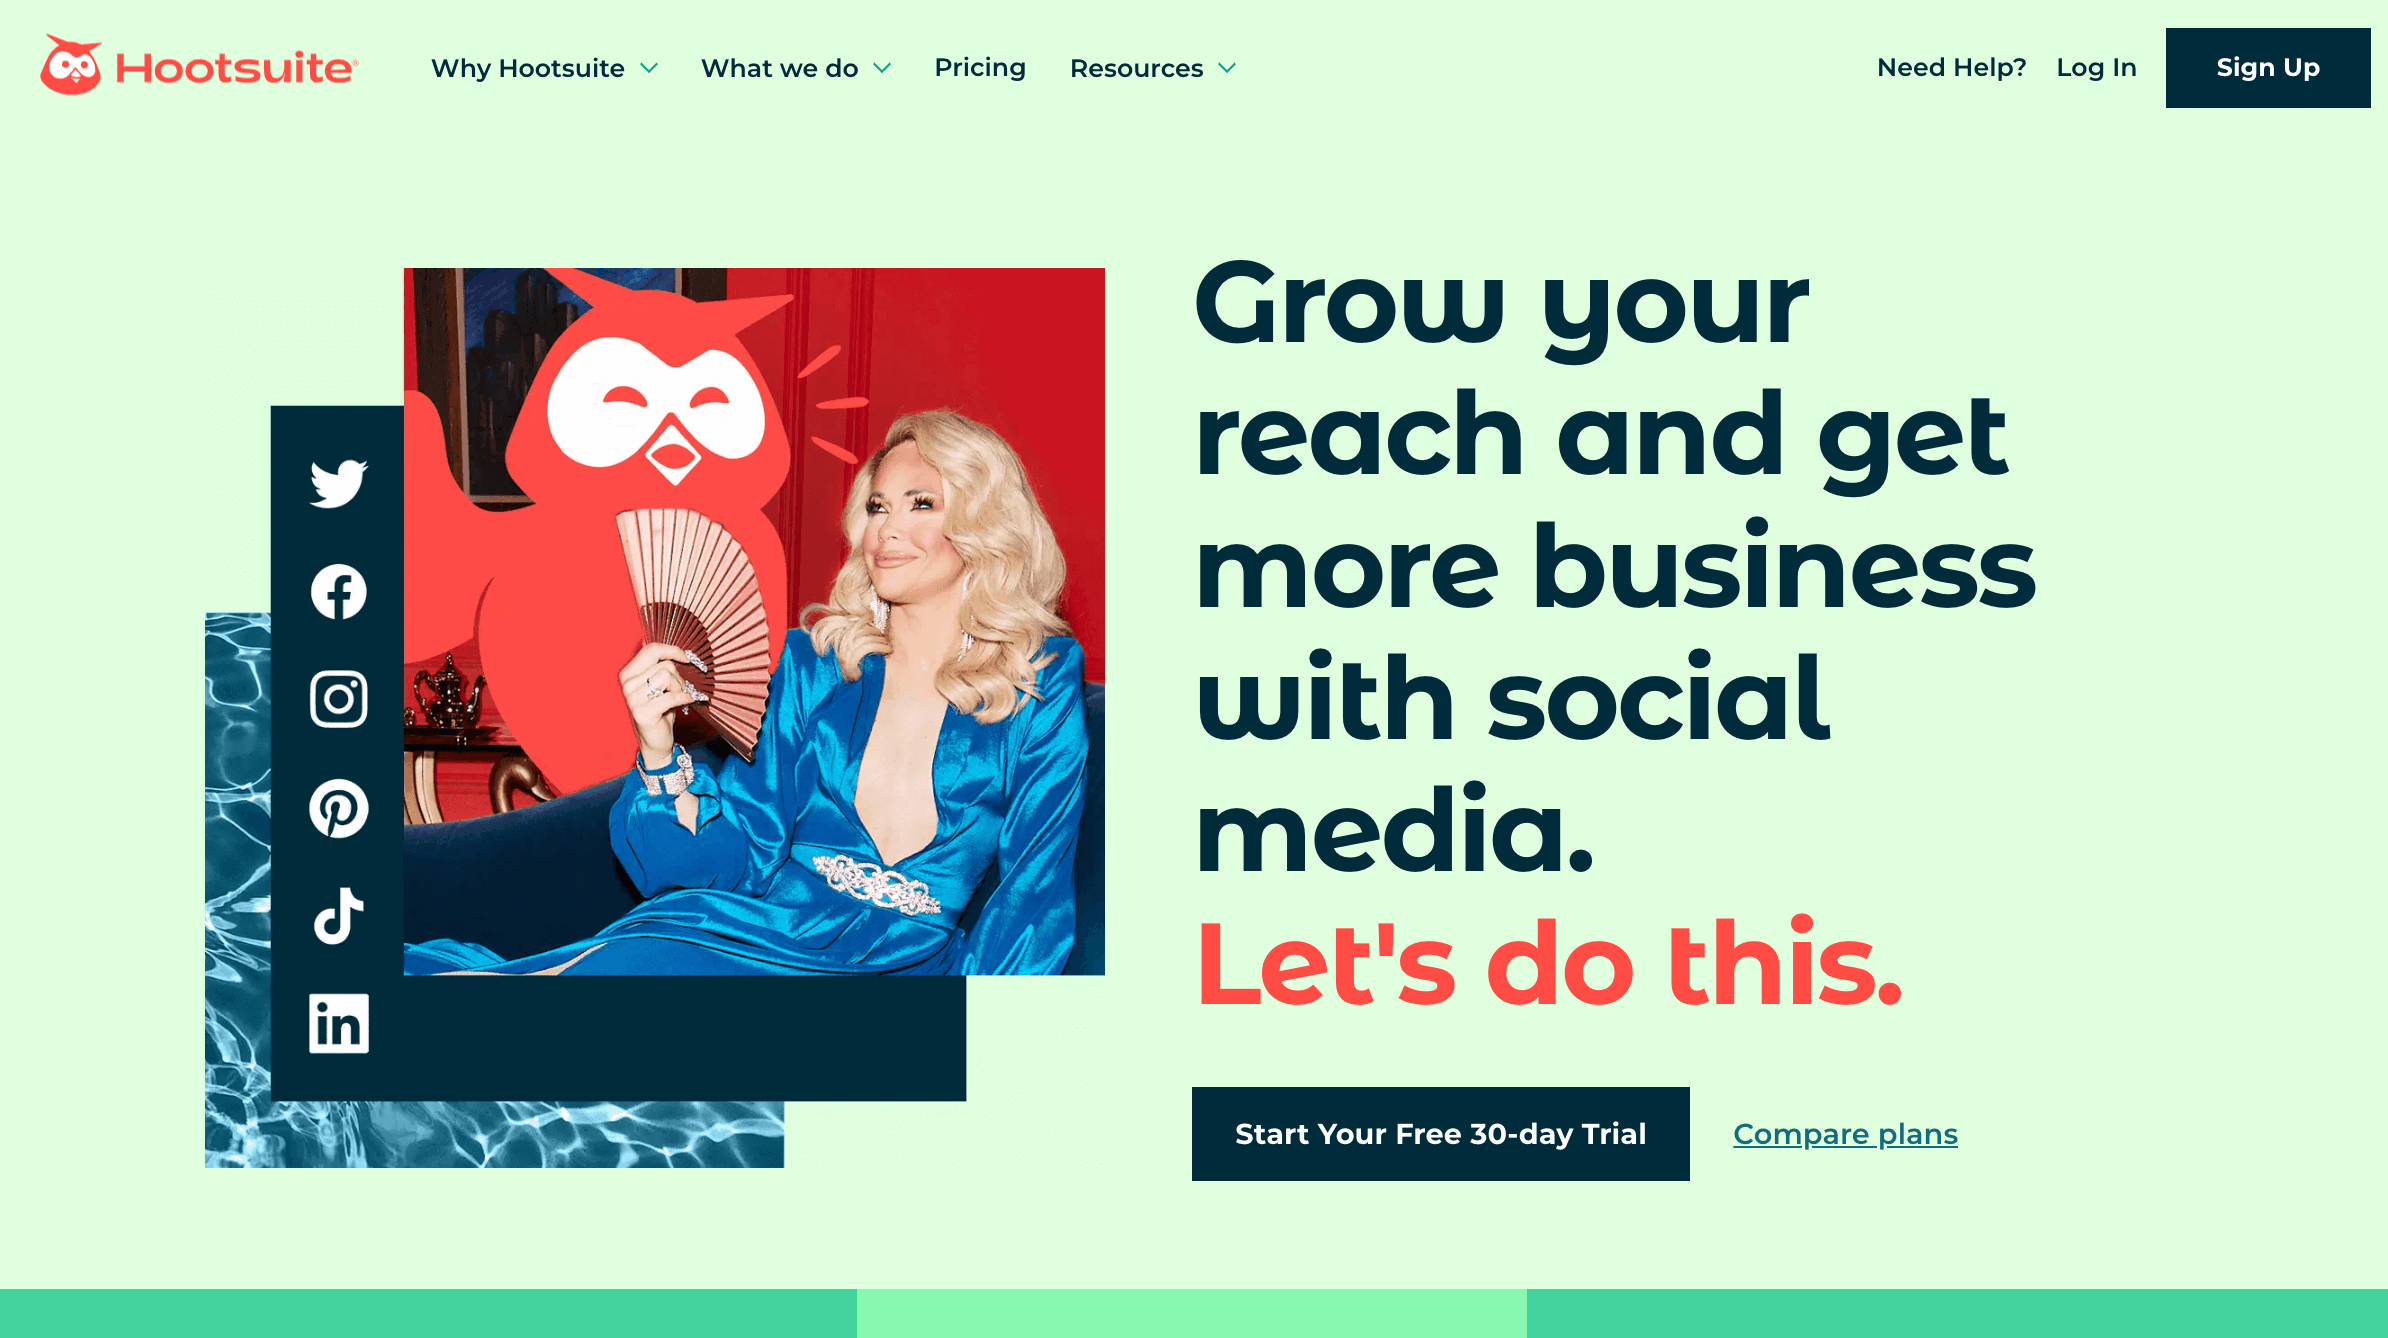 Hootsuite's home page